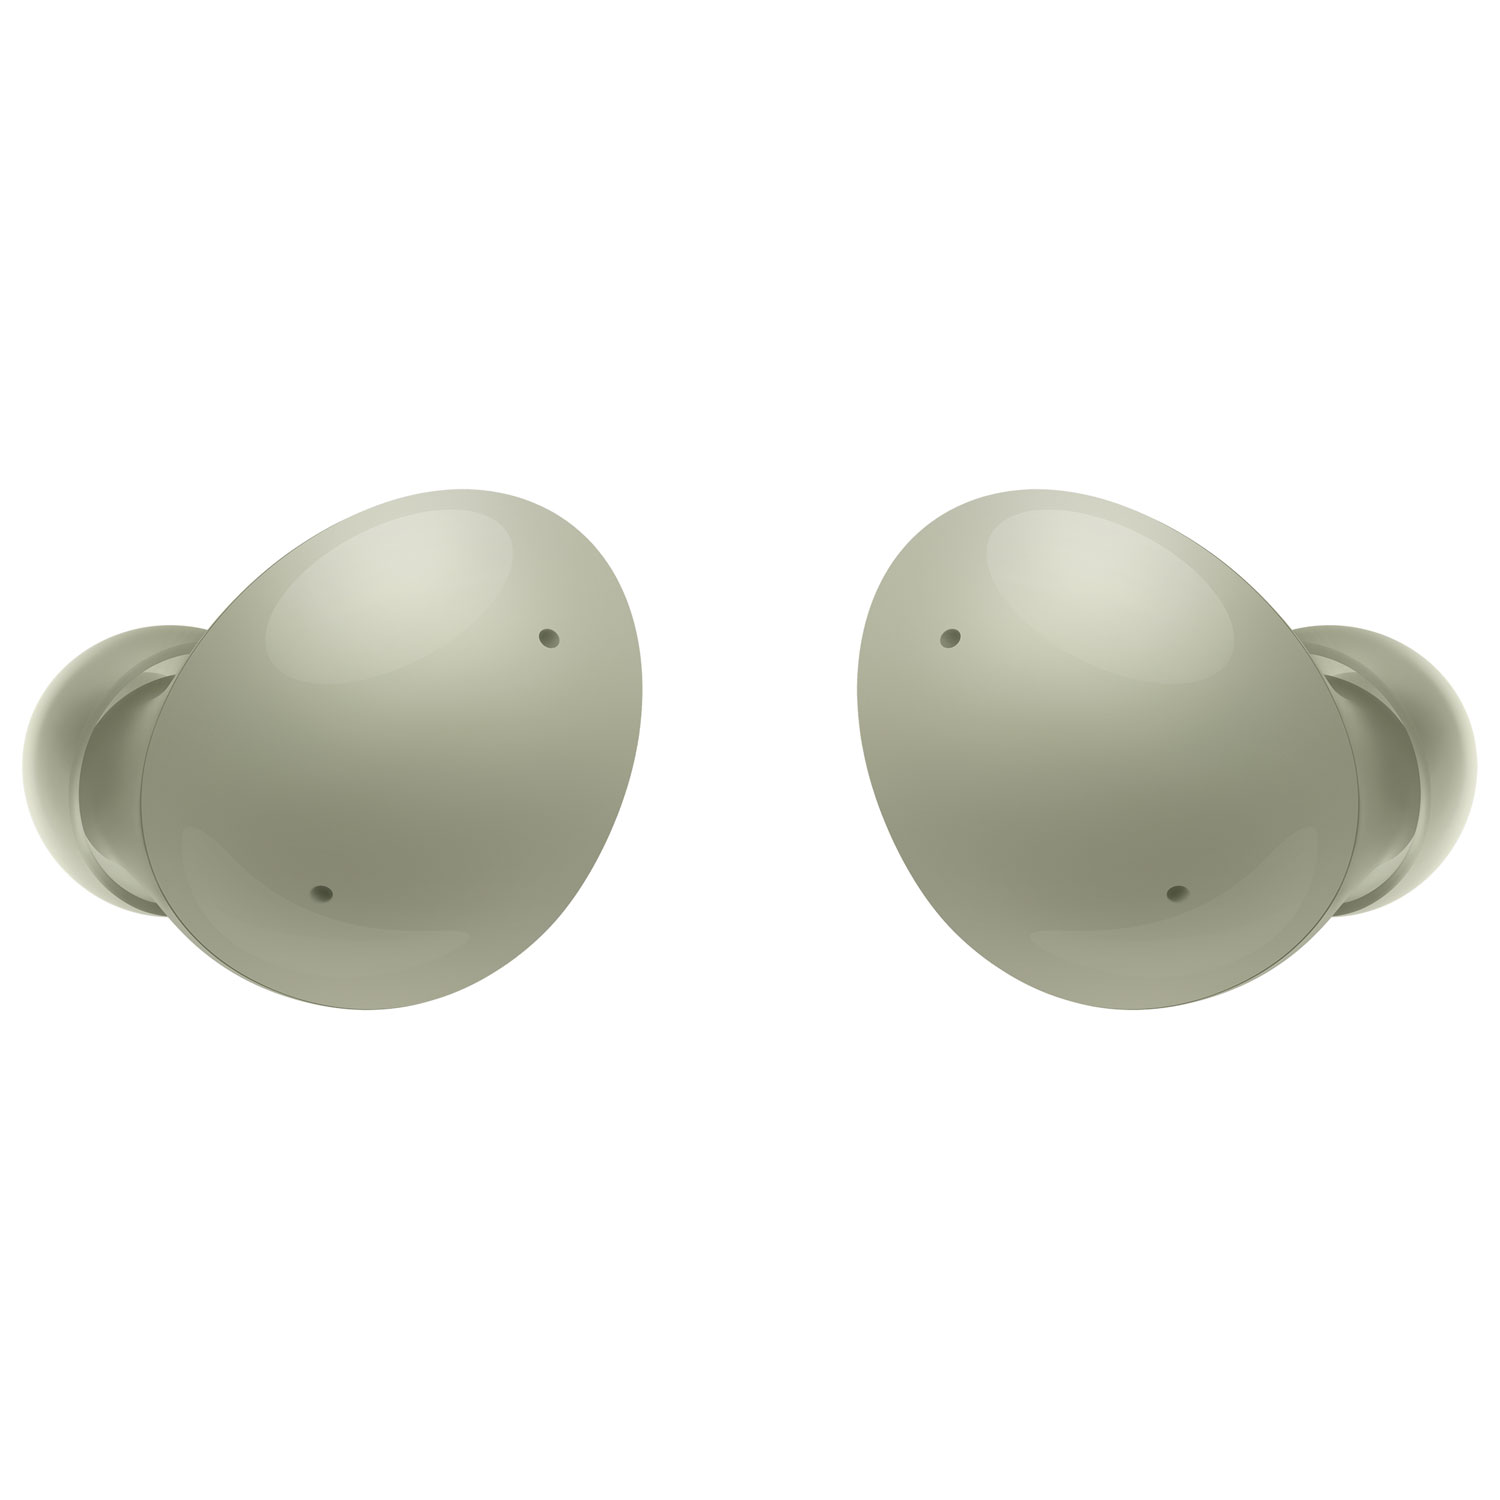 Samsung Galaxy Buds2 In-Ear Noise Cancelling True Wireless Earbuds - Olive Green